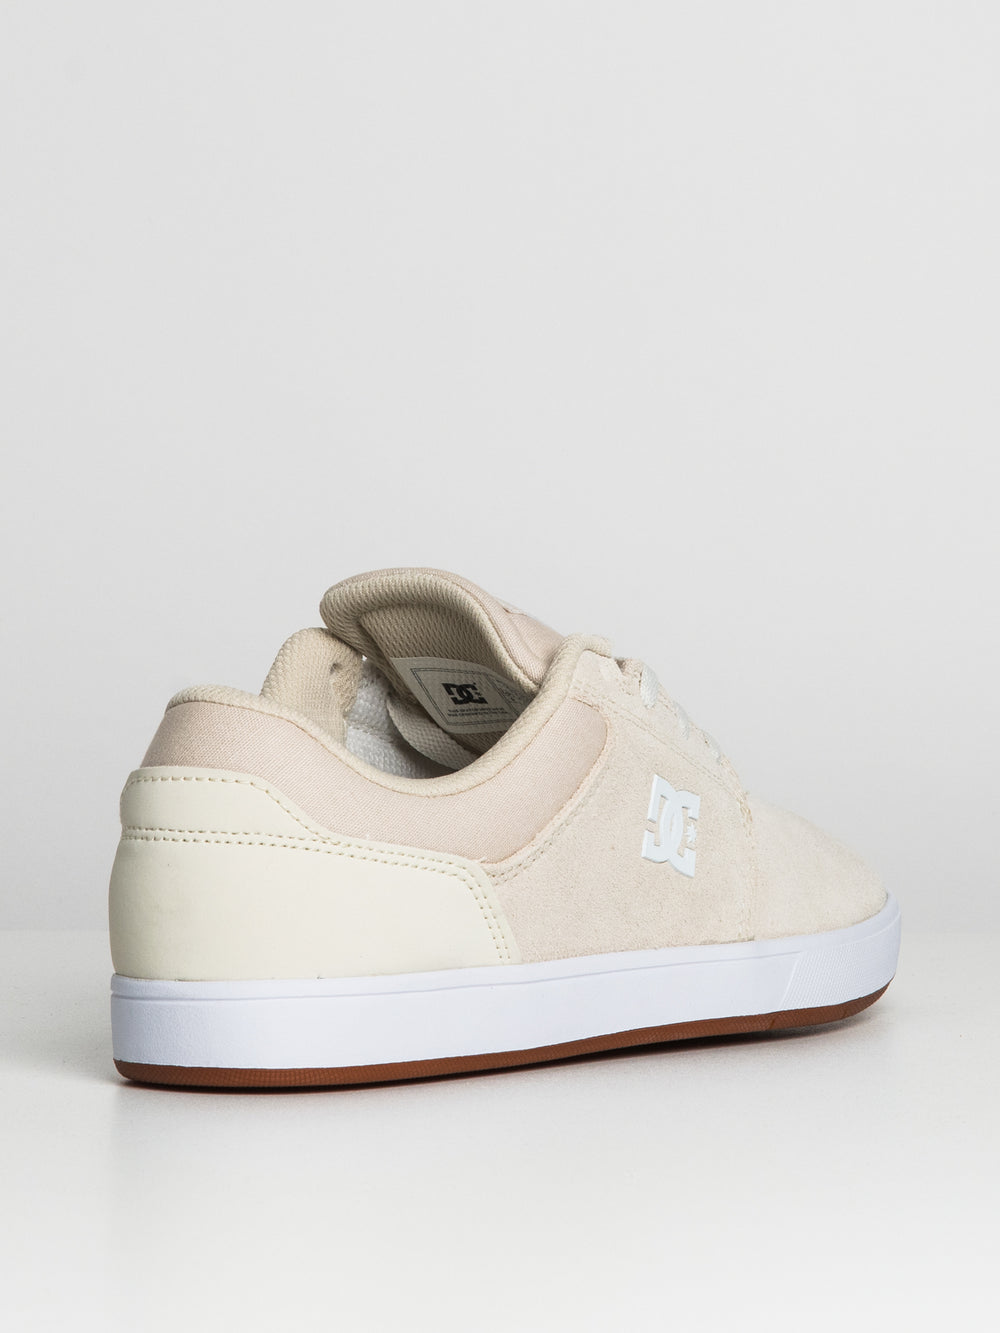 MENS DC SHOES CRISIS 2 Footwear Boathouse Collective 